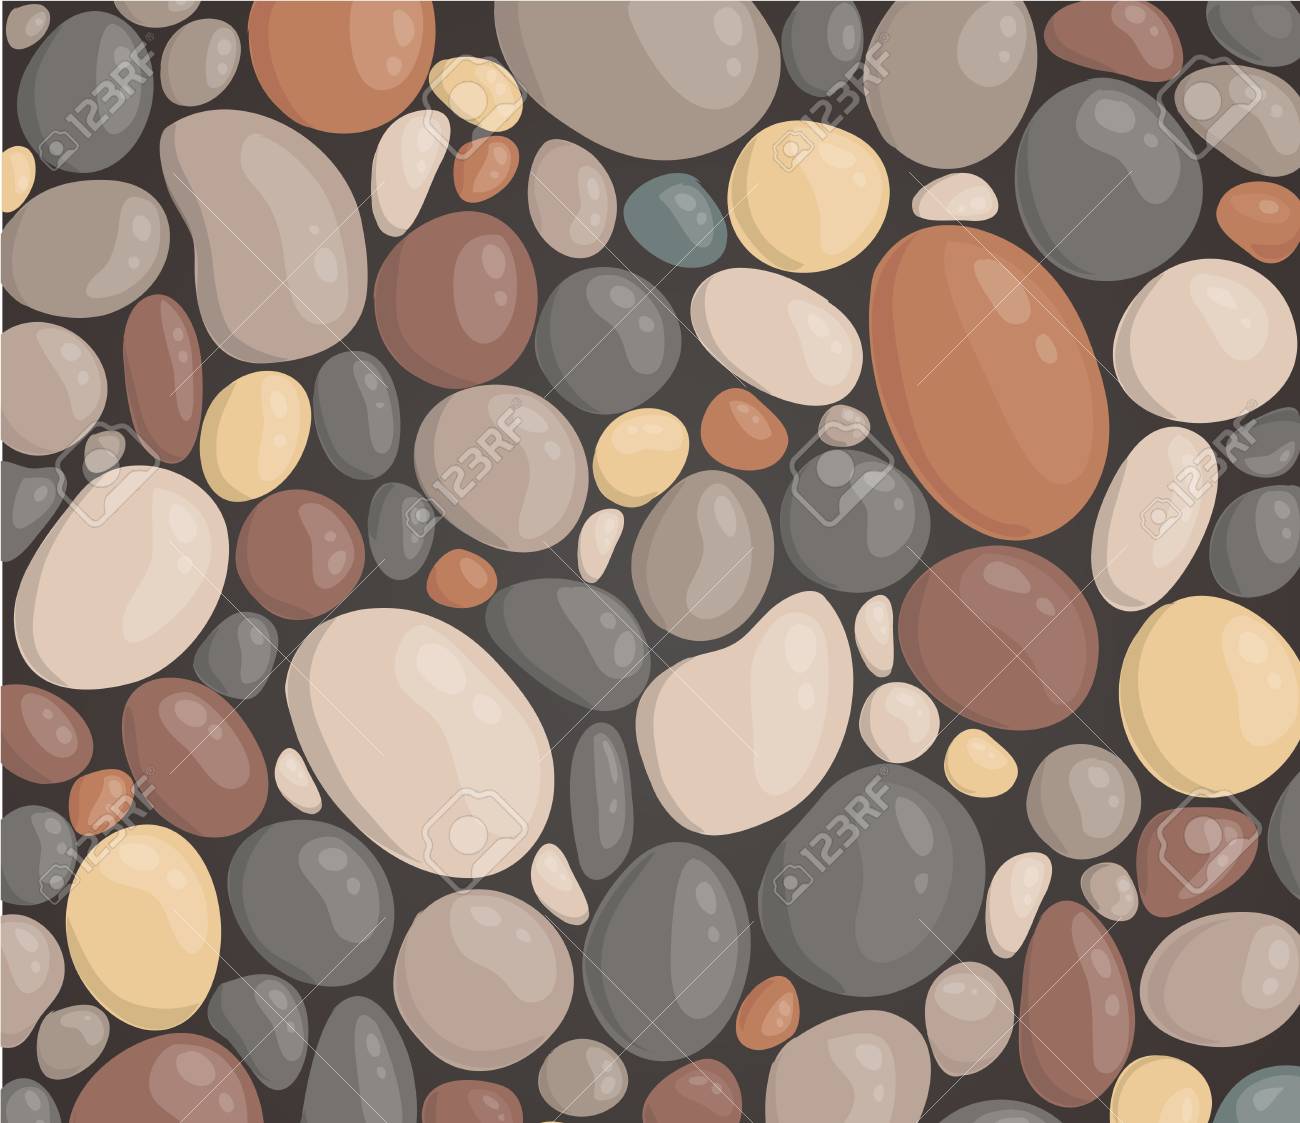 Modern Style Close Up Round Stone Background Wallpaper Vector